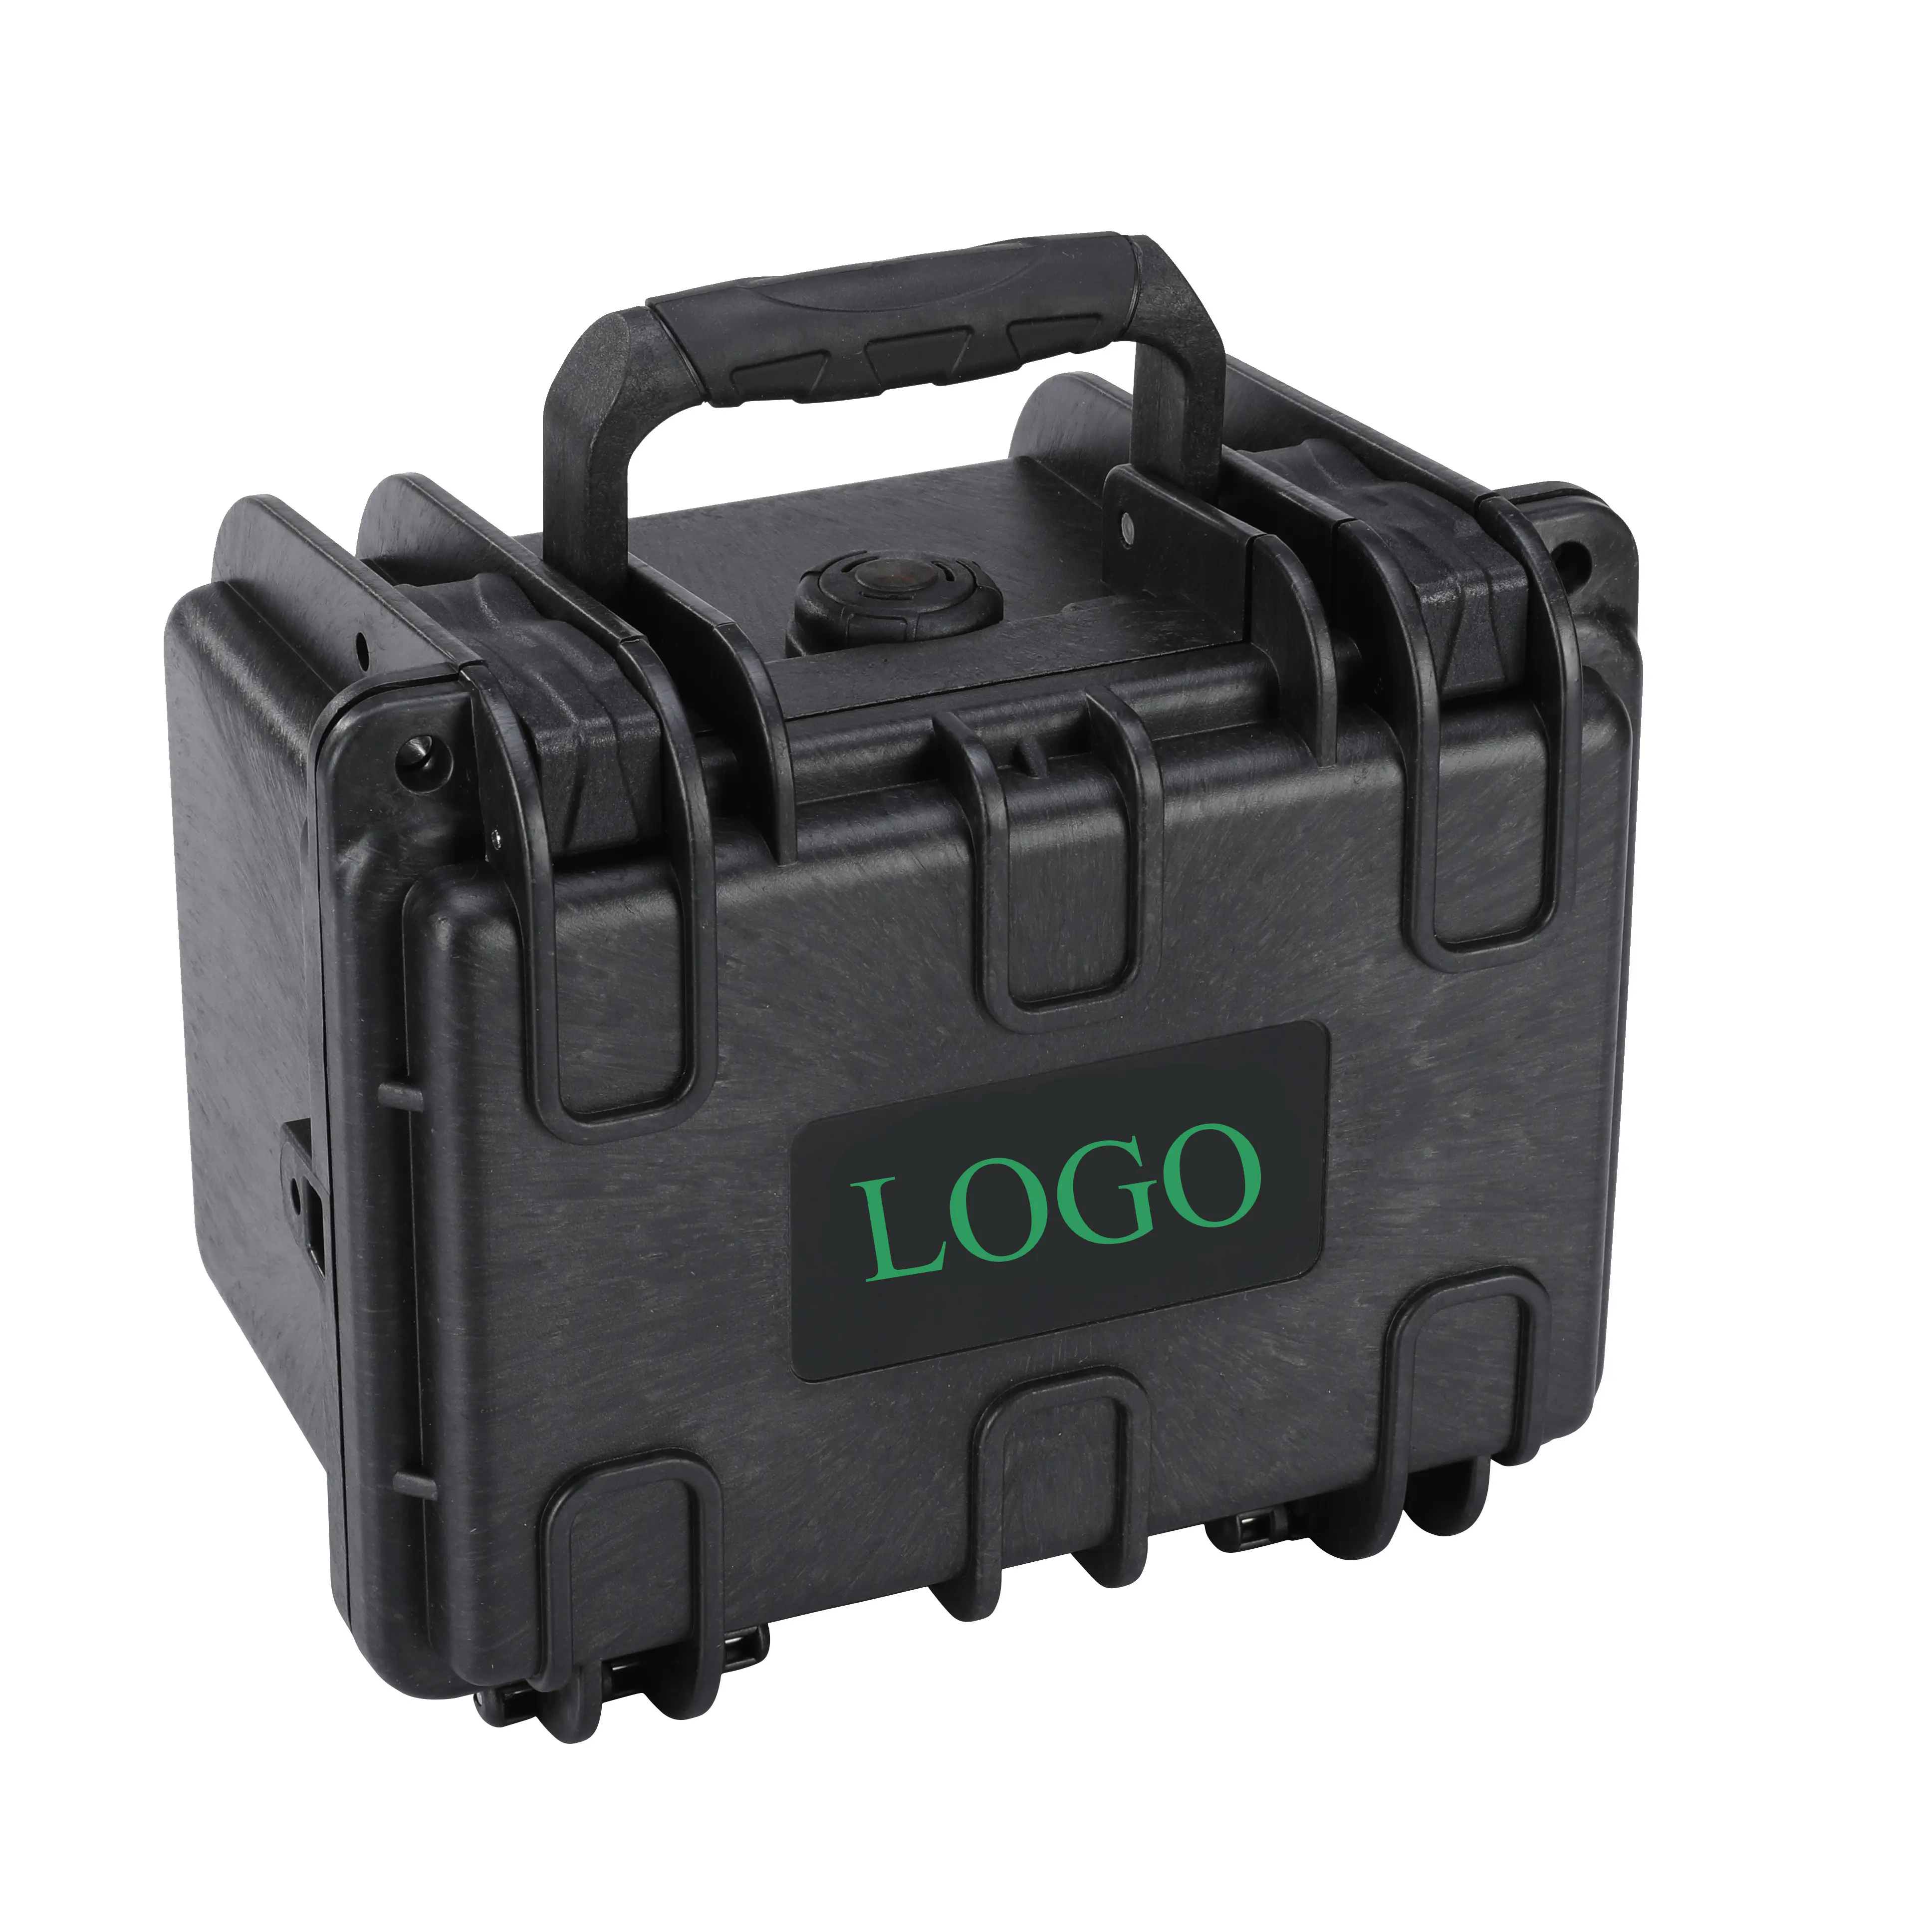 Storage Gun Boxes or Suitcase for Equipment Hunting Waterproof Packaging Plastic Protective Hard Foam High Quality